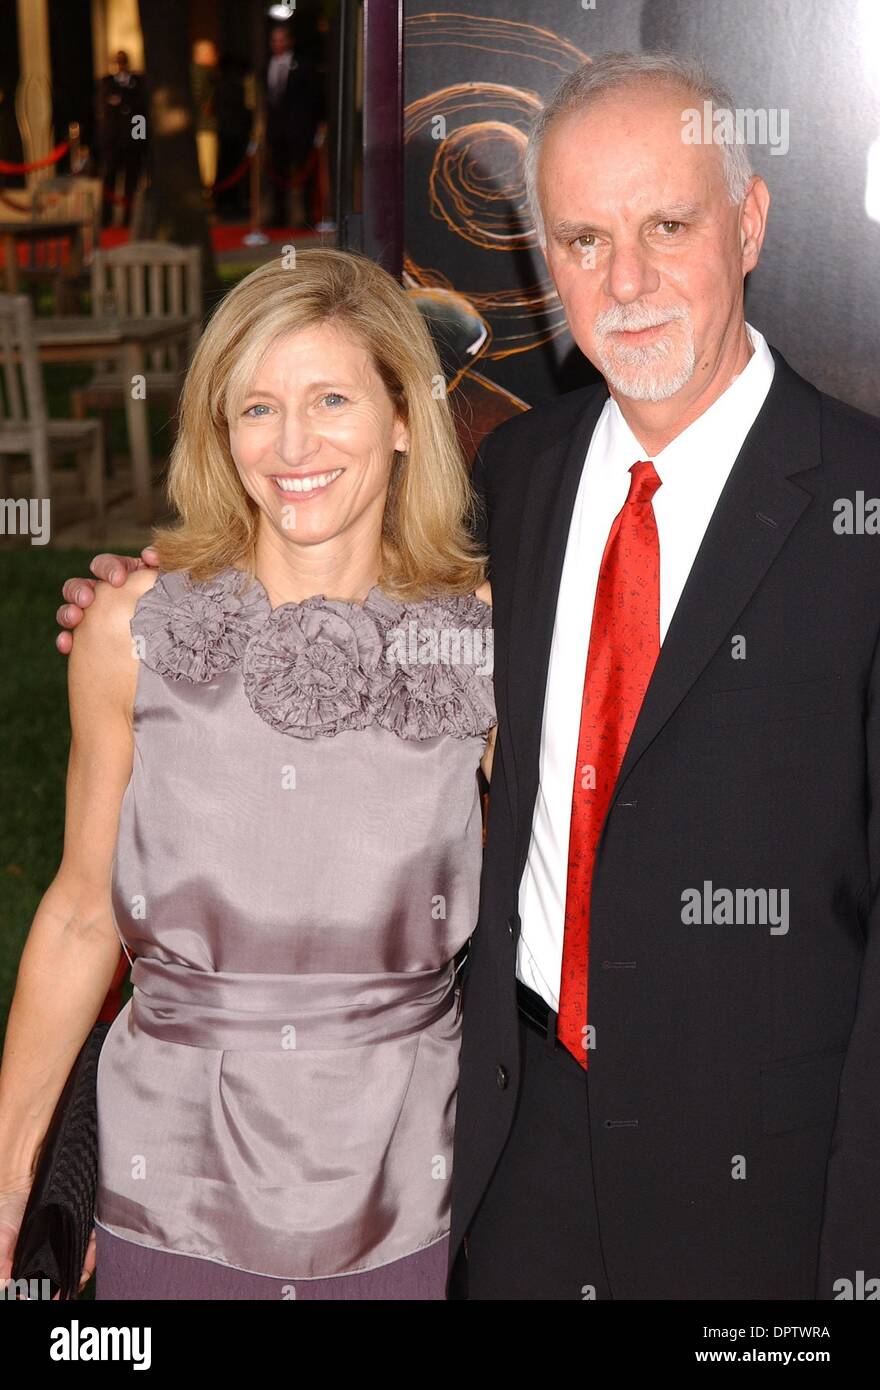 Apr 20, 2009 - Los Angeles, California, USA - STEVE LOPEZ and wife (One of  the Charactors the Film is based on) at 'The Soloist' Los Angeles Premiere  held at Paramount Studios